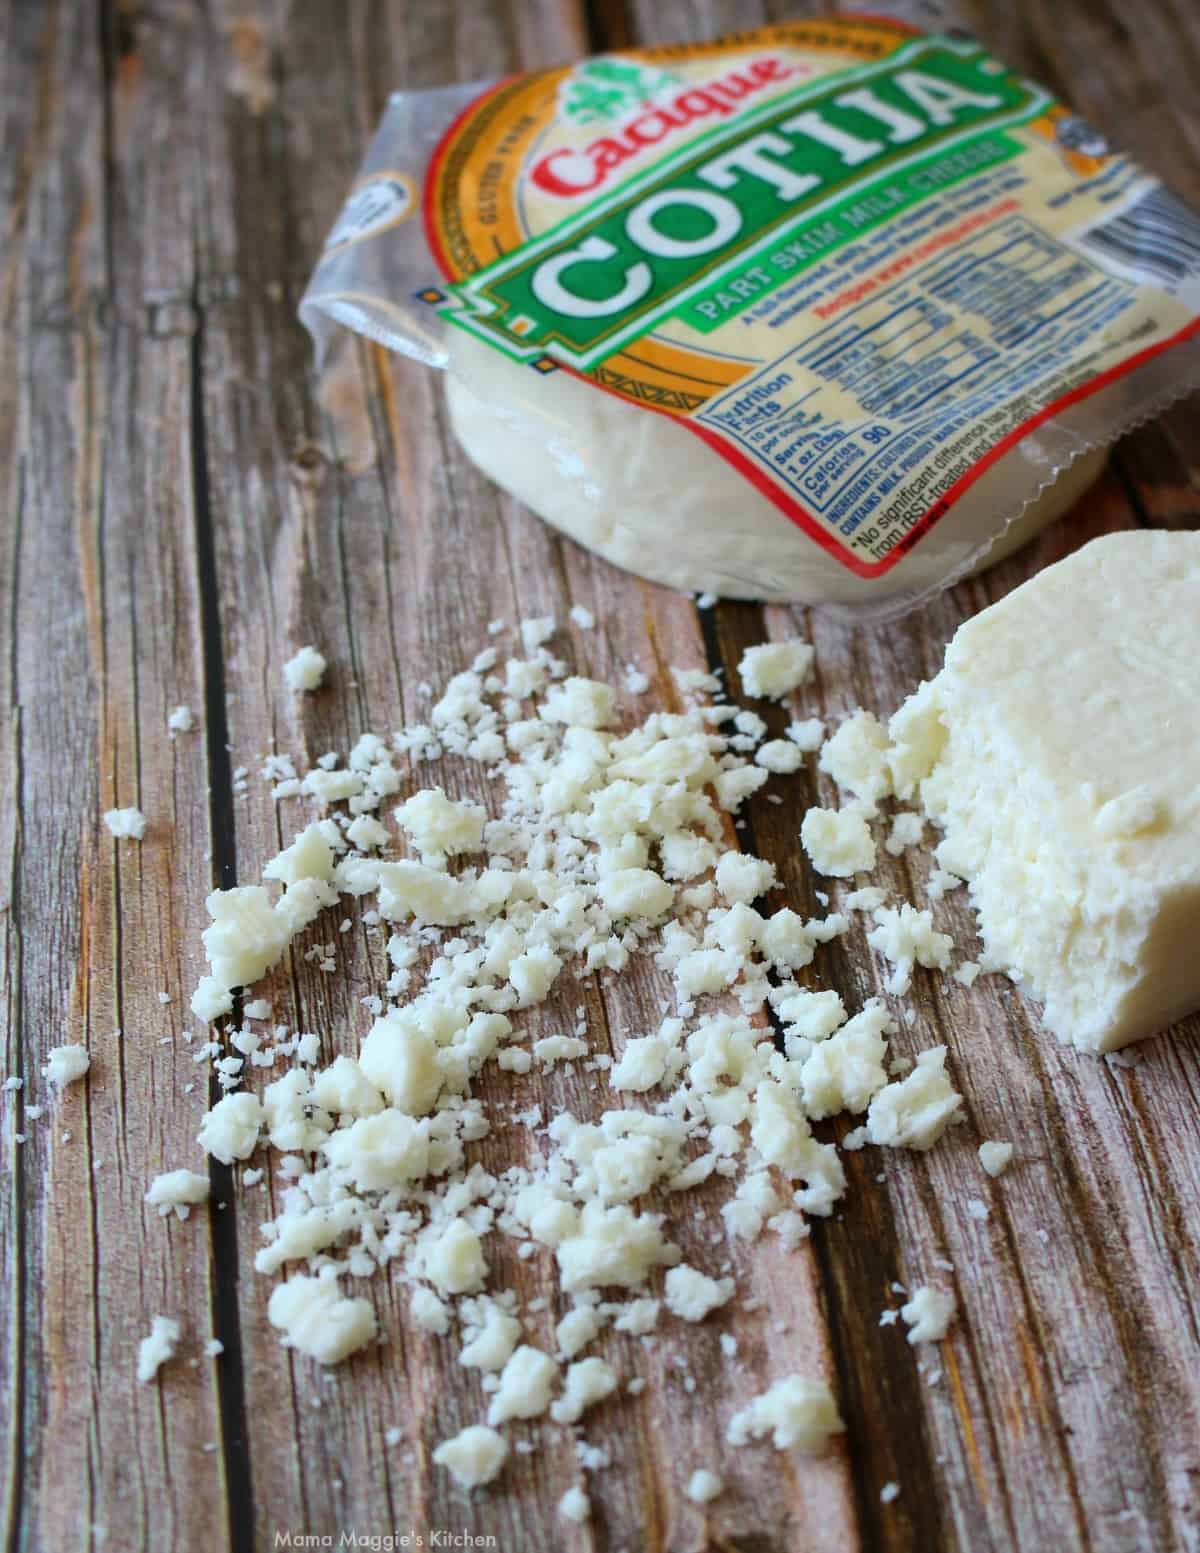 Crumbled cotija cheese next to a package of cheese.